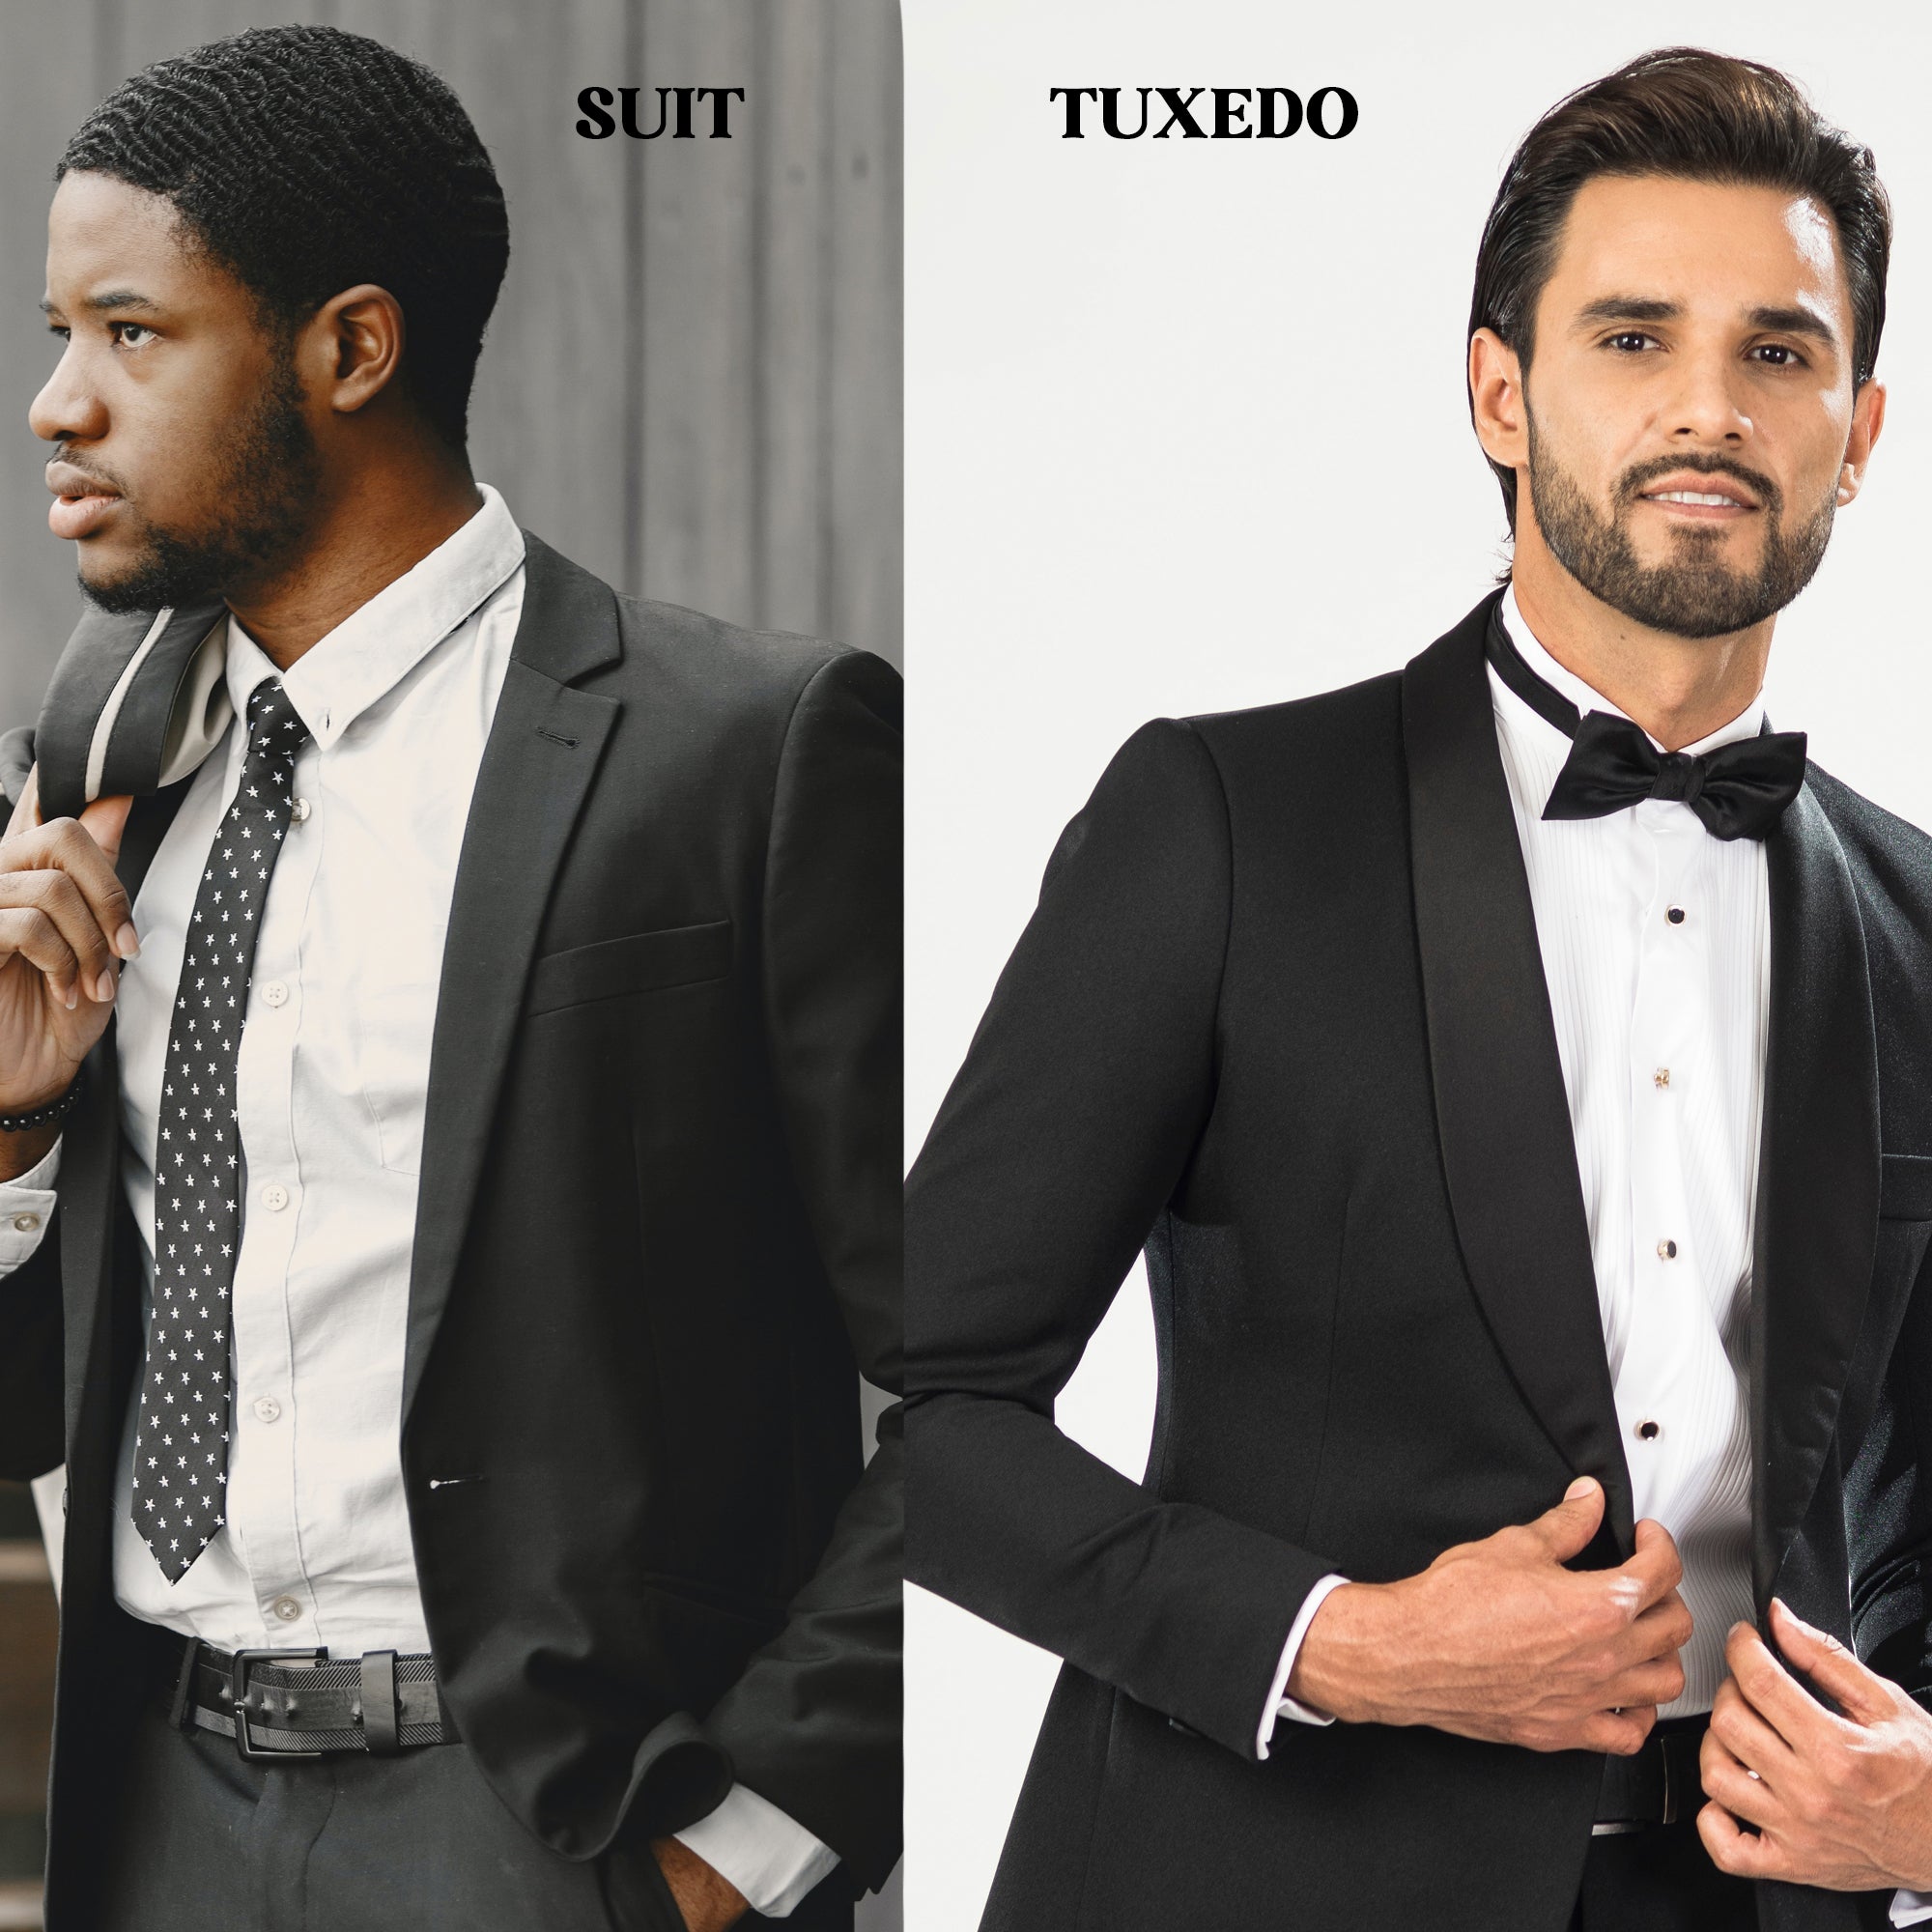 Tuxedo or Suit? Making the Right Choice for Prom